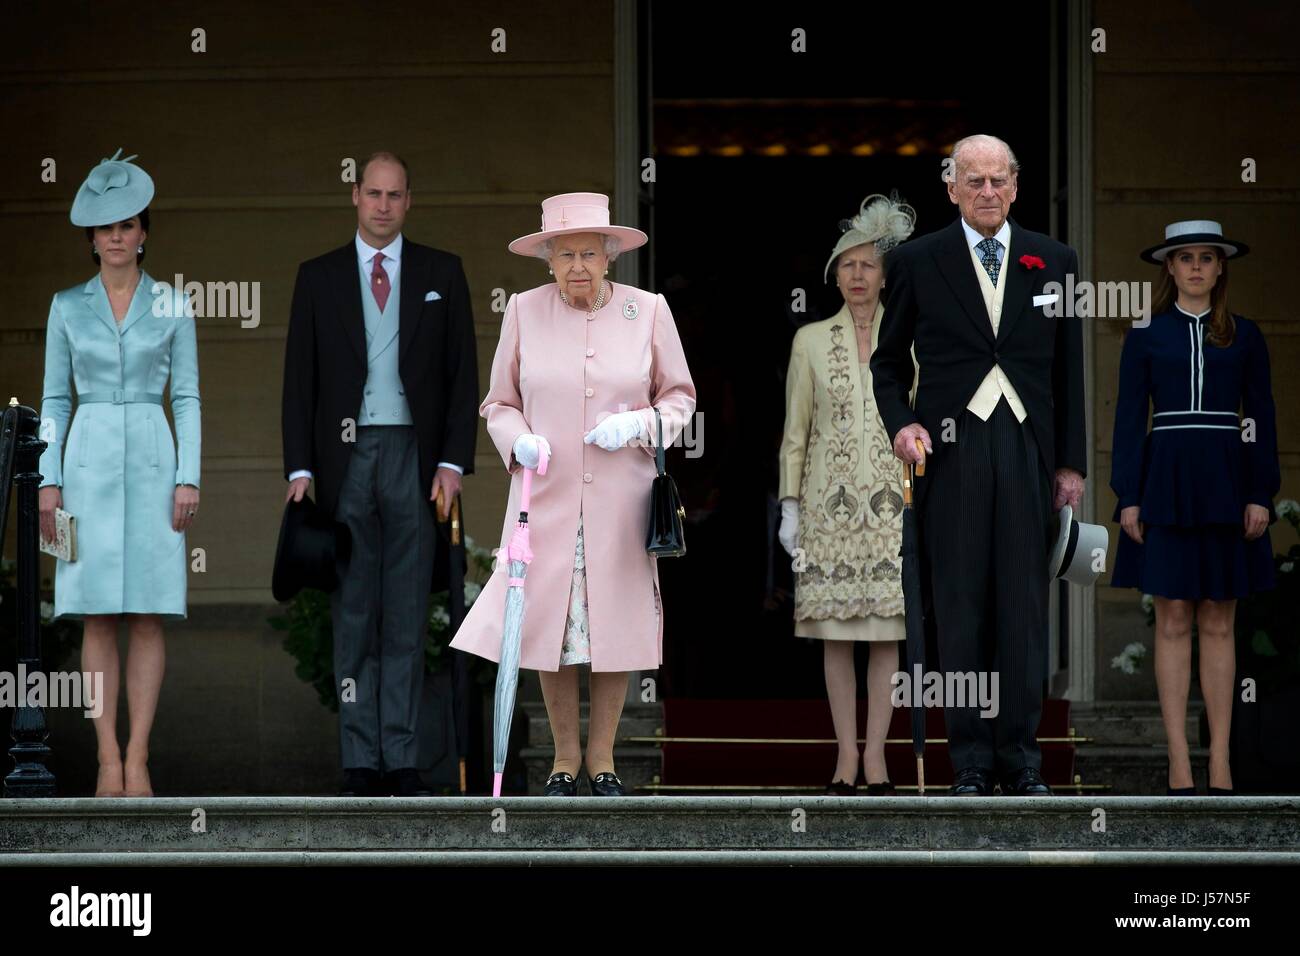 (left to right) The Duchess of Cambridge, the Duke of Cambridge, Queen Elizabeth II, the Princess Royal, the Duke of Edinburgh and Princess Beatrice at a garden party at Buckingham Palace in London. Stock Photo